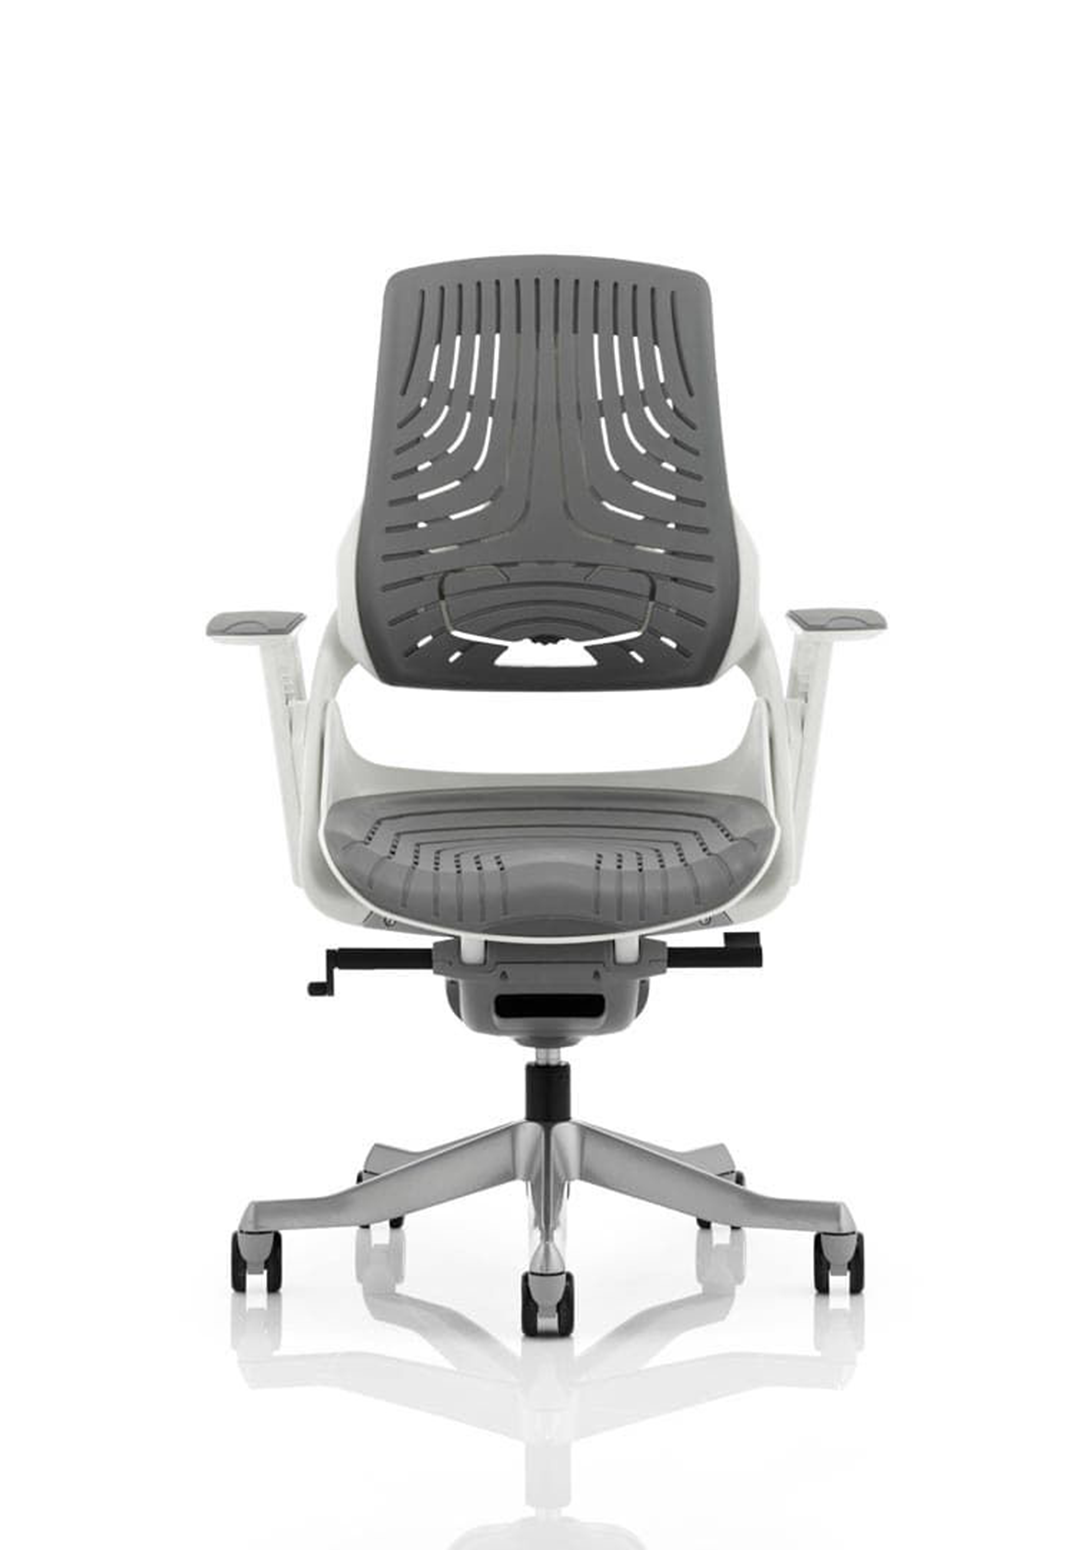 Zure High Back White Shell Executive Office Chair with Arms